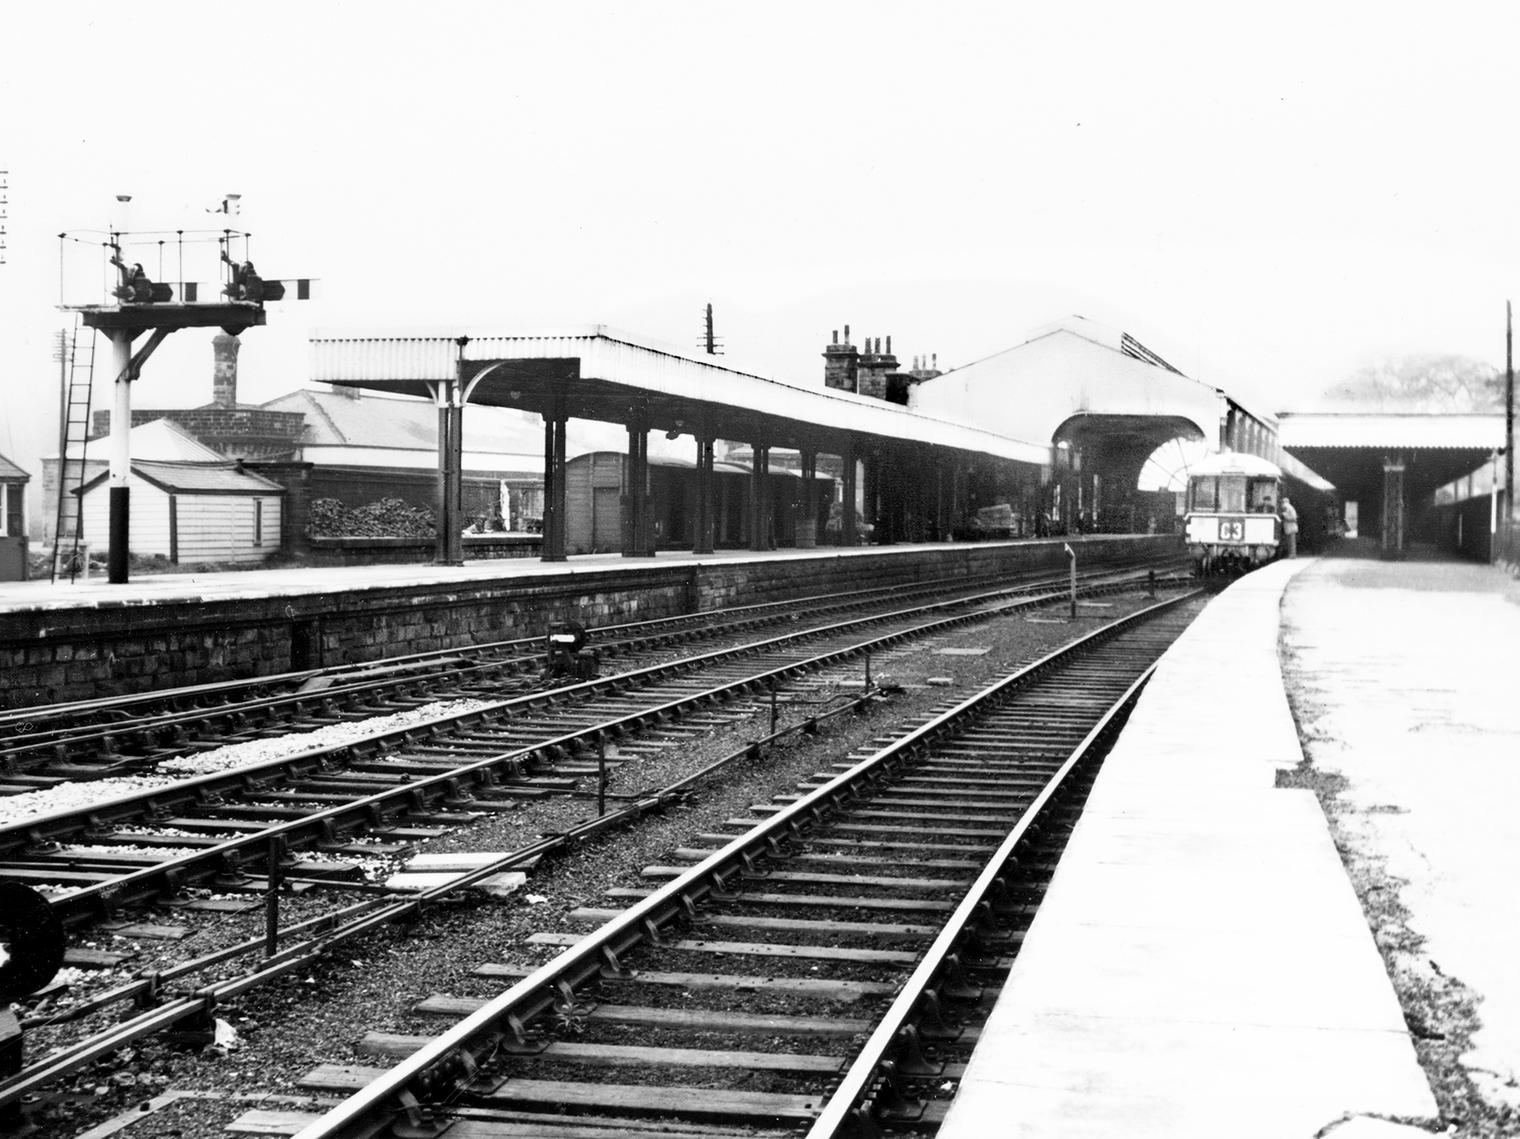 Another of Buxton Station, from May 1967